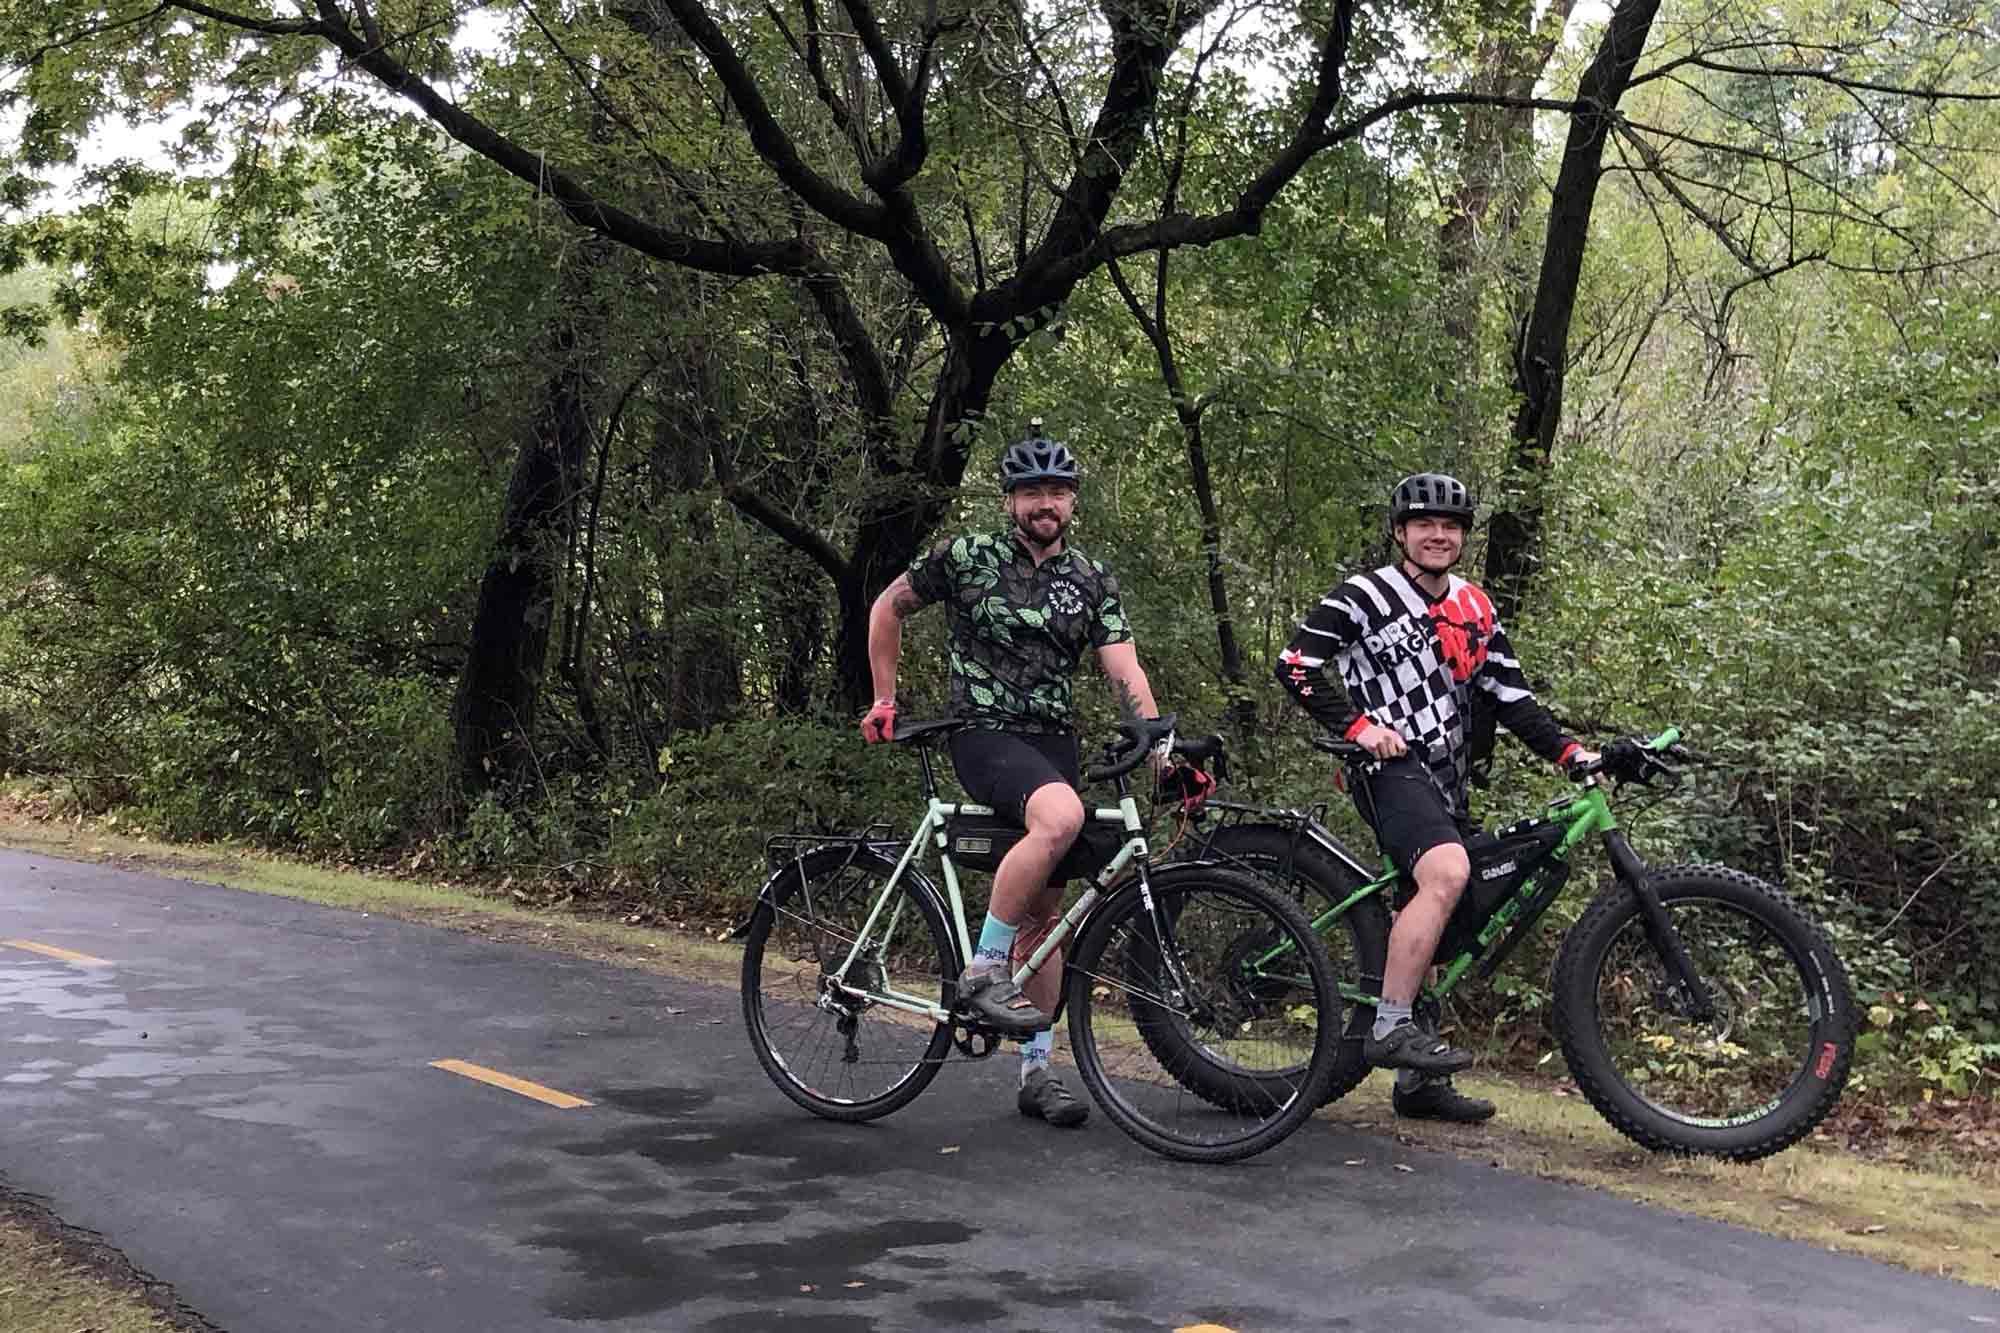 Two cyclists stand on a paved trail with their Surly bikes at a right profile view, green leafed trees in woods behind